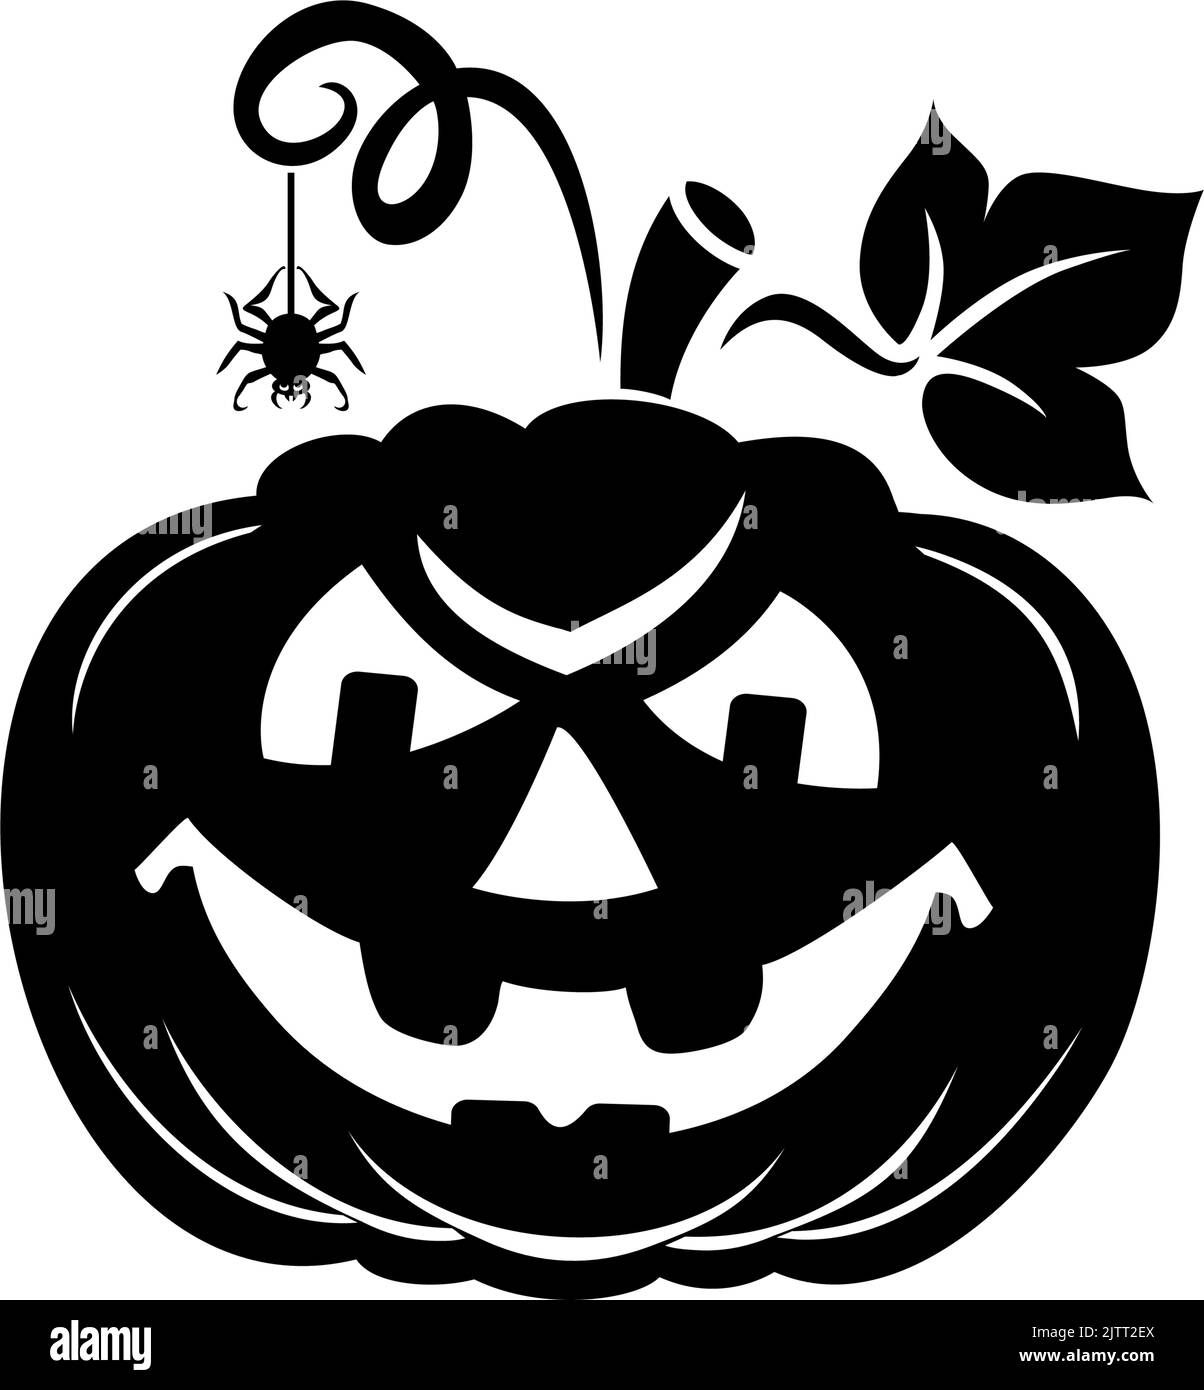 Halloween black element. Silhouette festive pumpkin with smiling face. Vector on transparent background Stock Vector